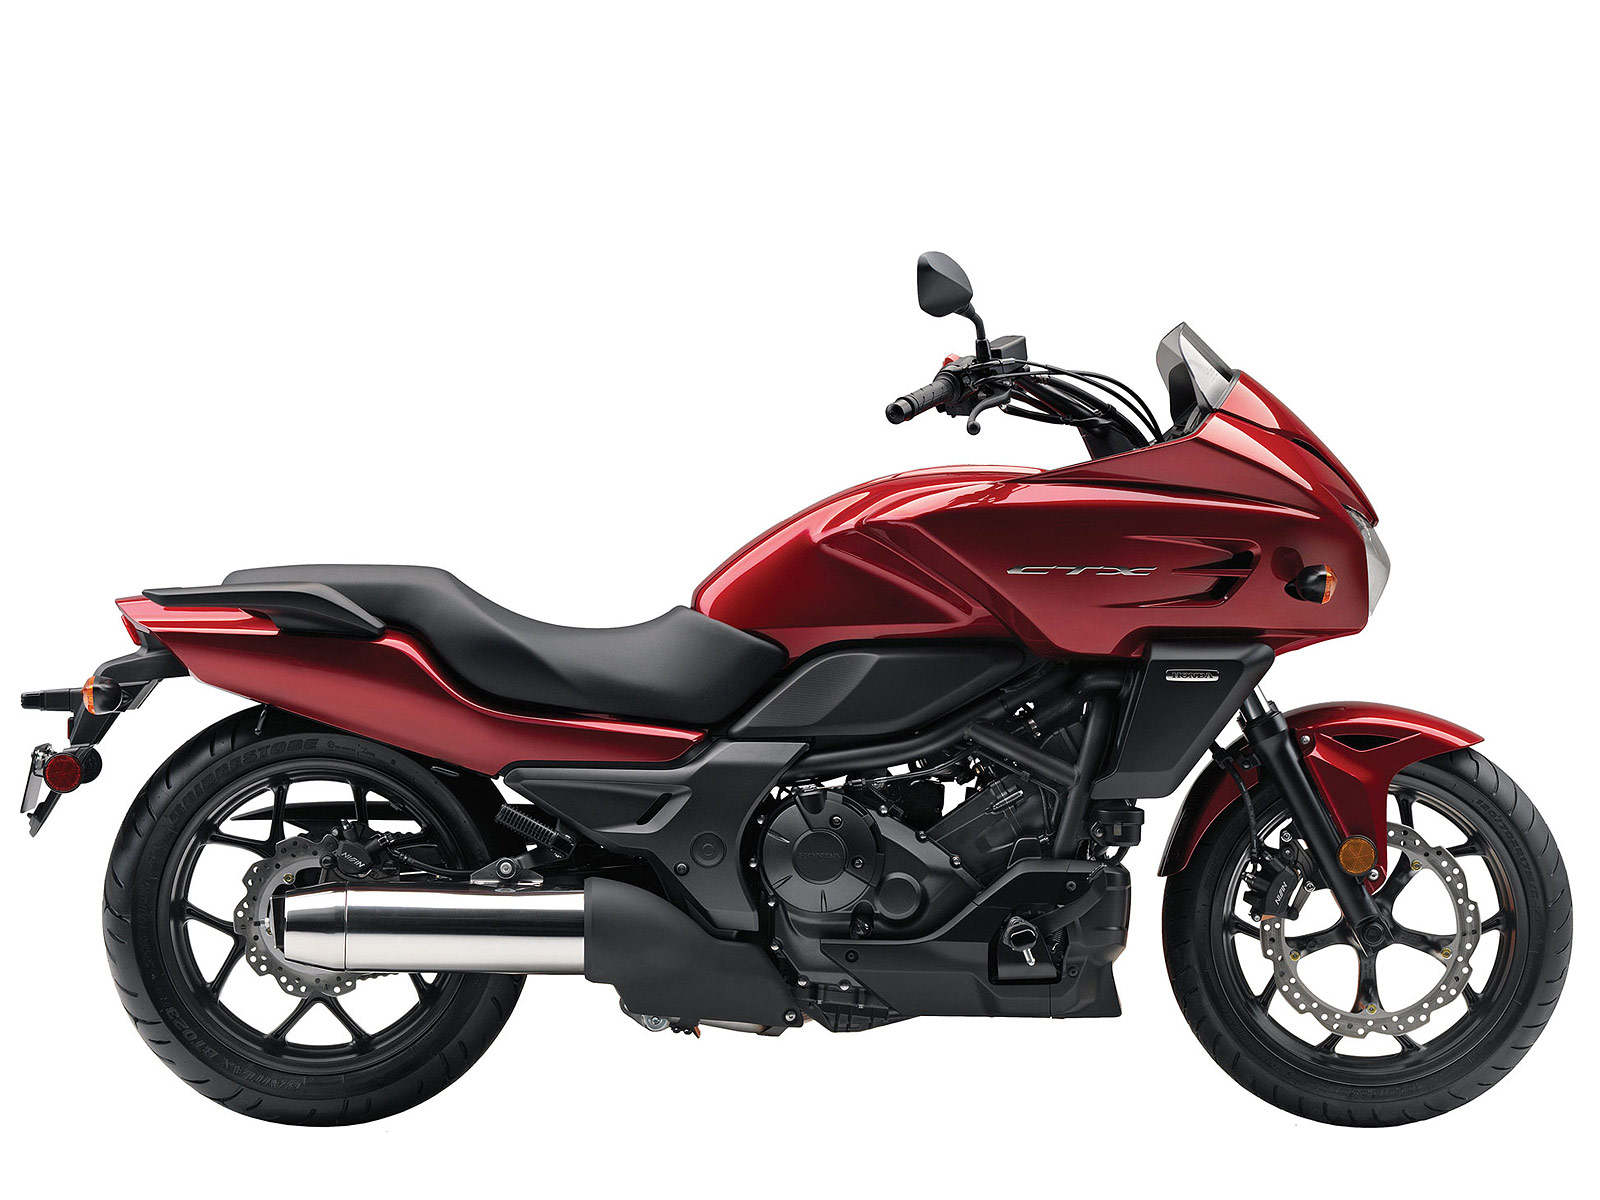  Gambar Motor Honda  2014 CTX700 pictures specifications